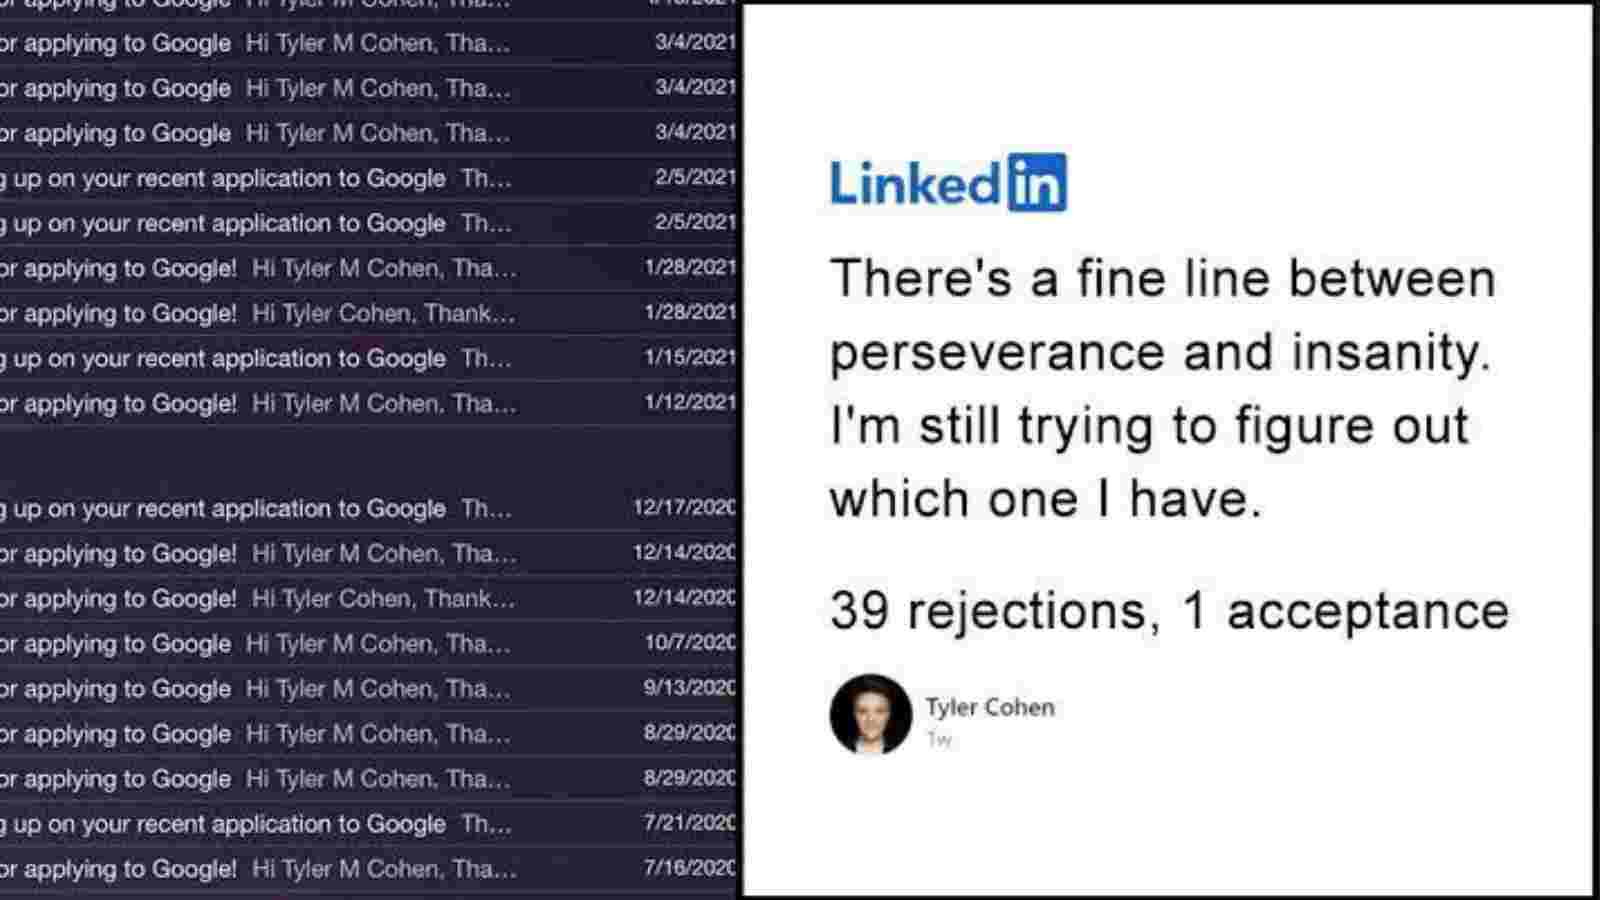 Ty;er Cohen's LinkedIn Post about getting accepted by Google at the 40th Attempt